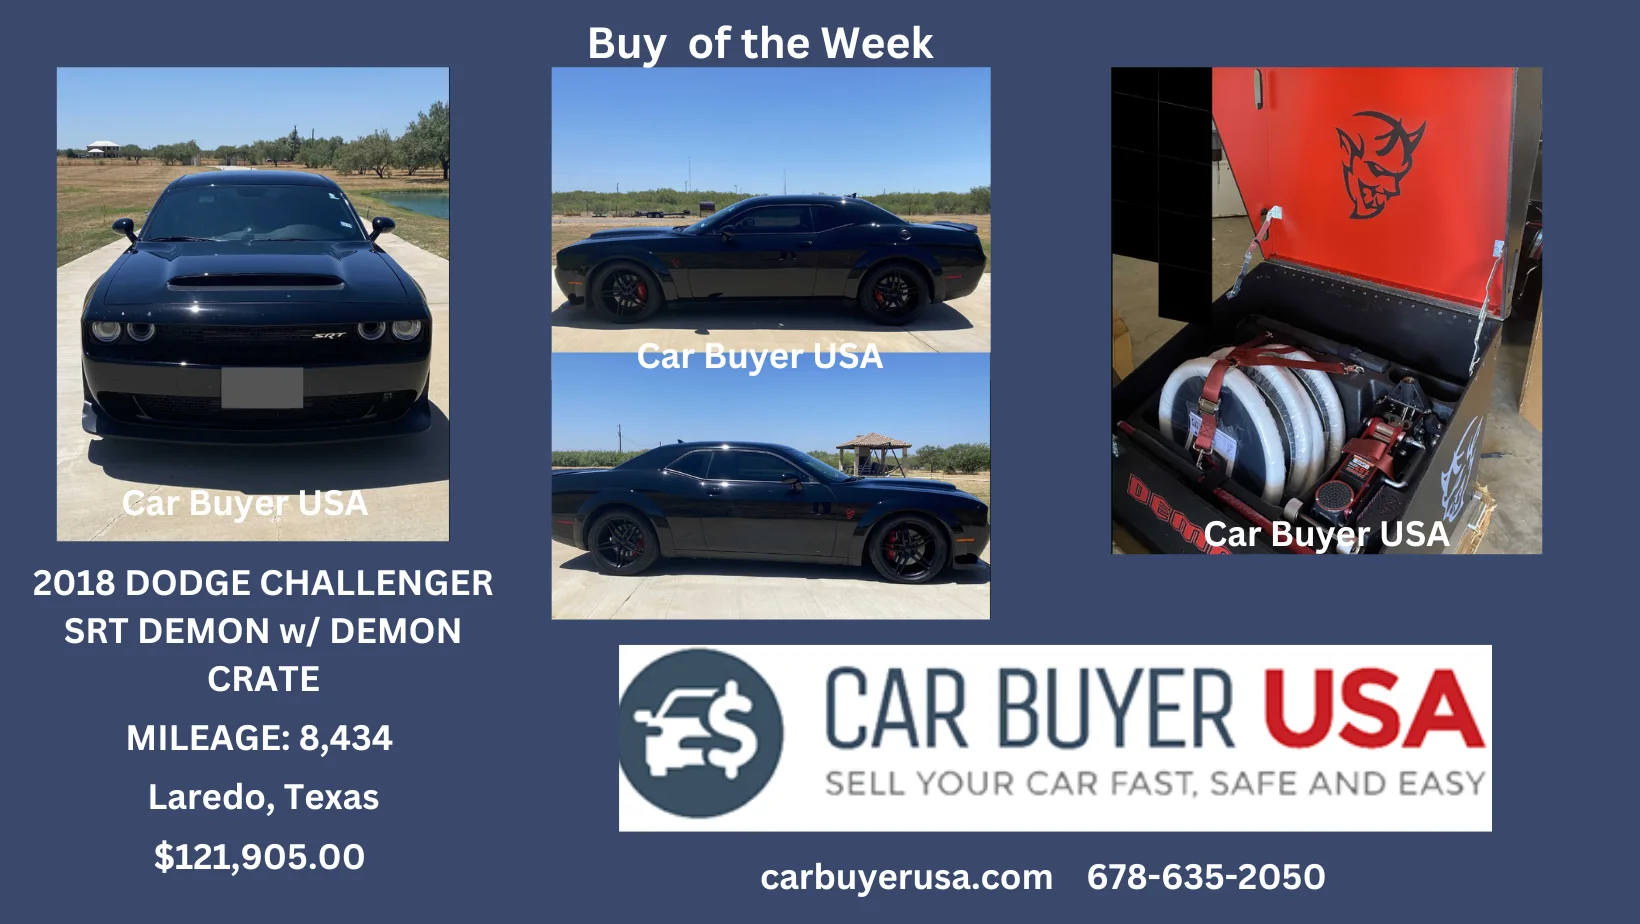 CarBuyerUSA bought this 2018 Dodge Challenger SRT Demon w/ Demon Crate in Laredo, TX for $121,905.00